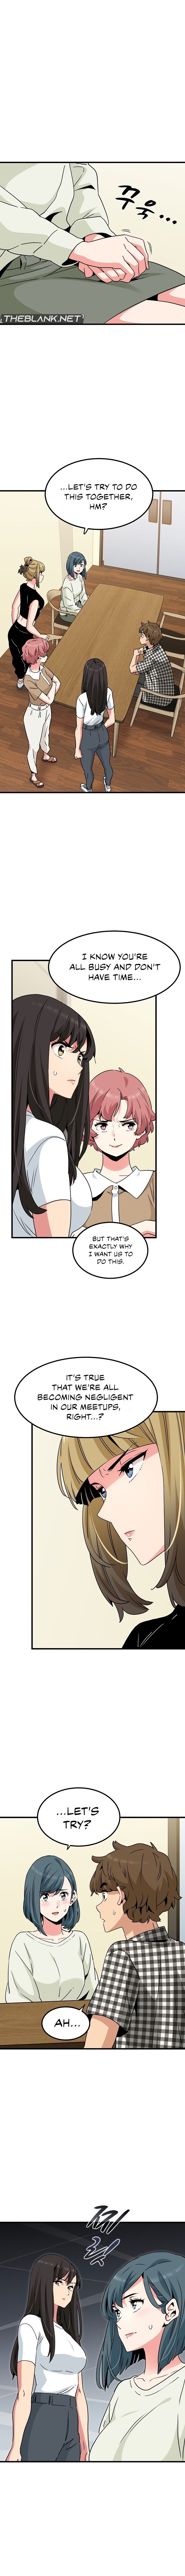 a-turning-point-chap-38-4